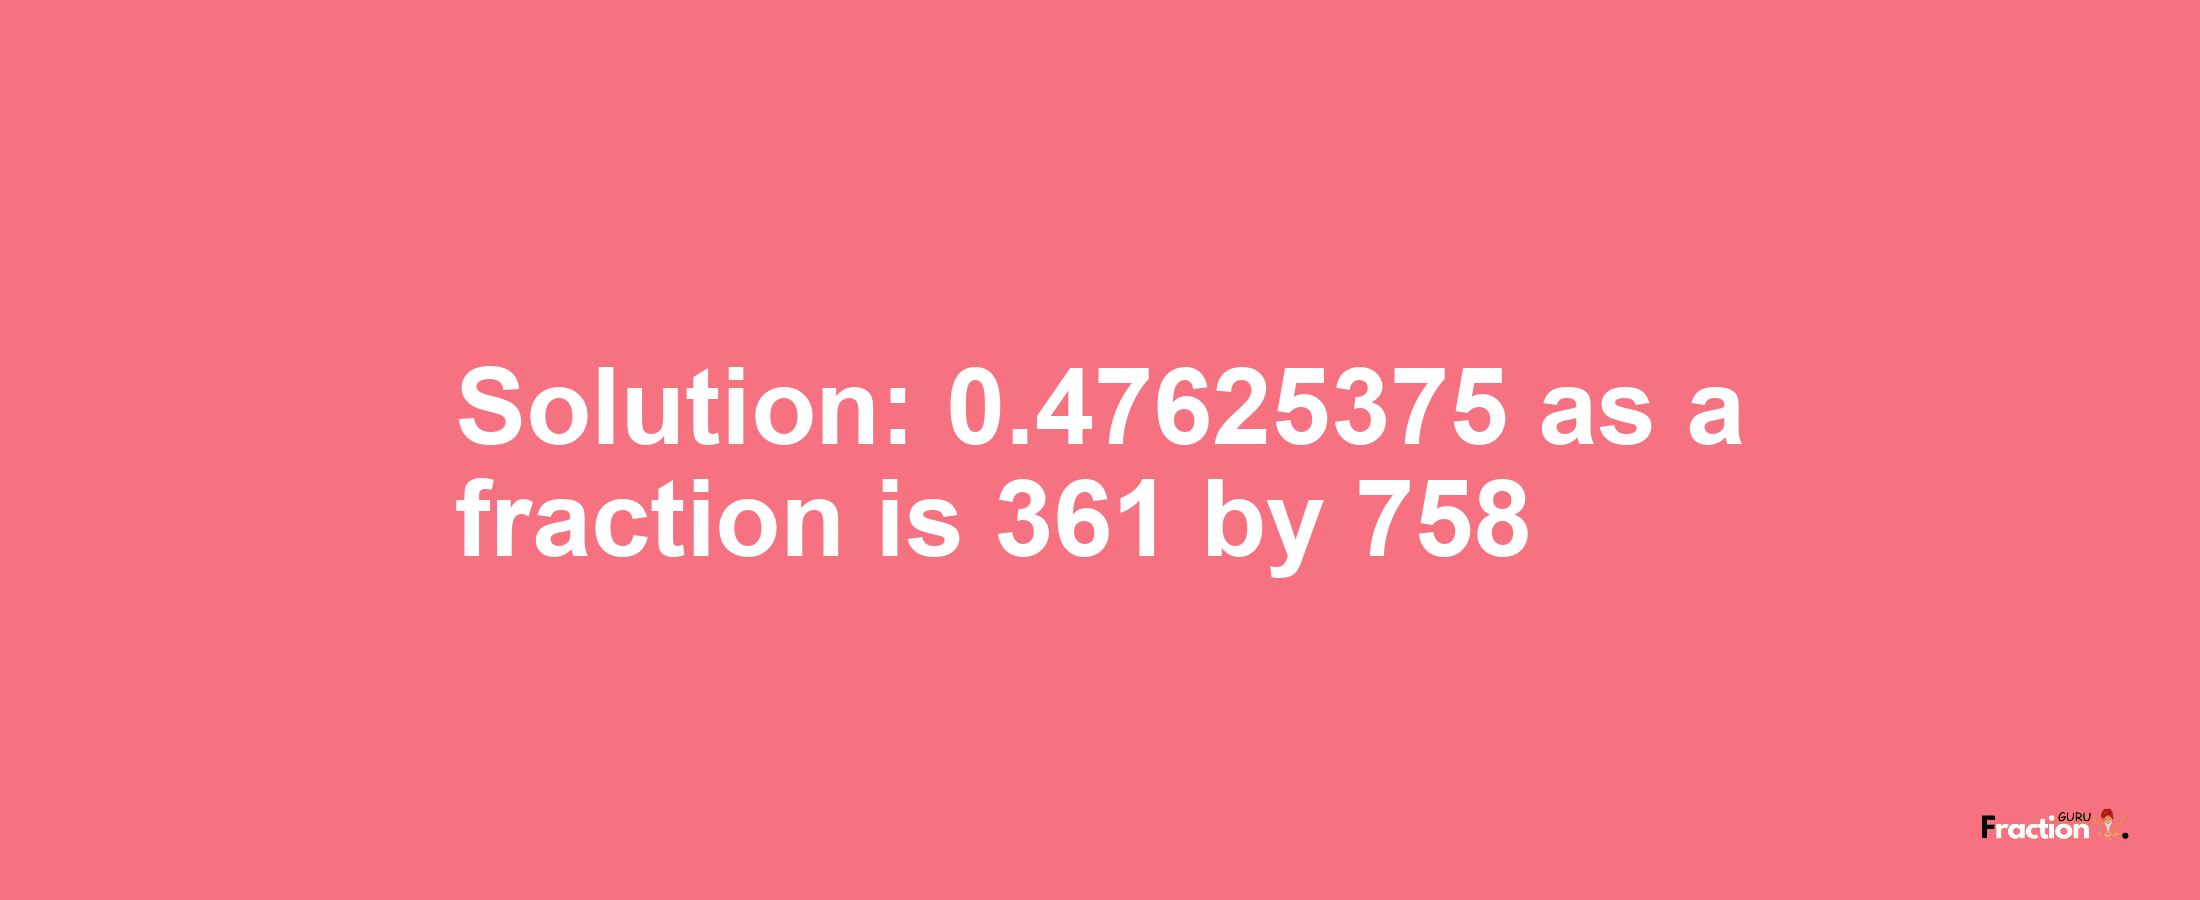 Solution:0.47625375 as a fraction is 361/758